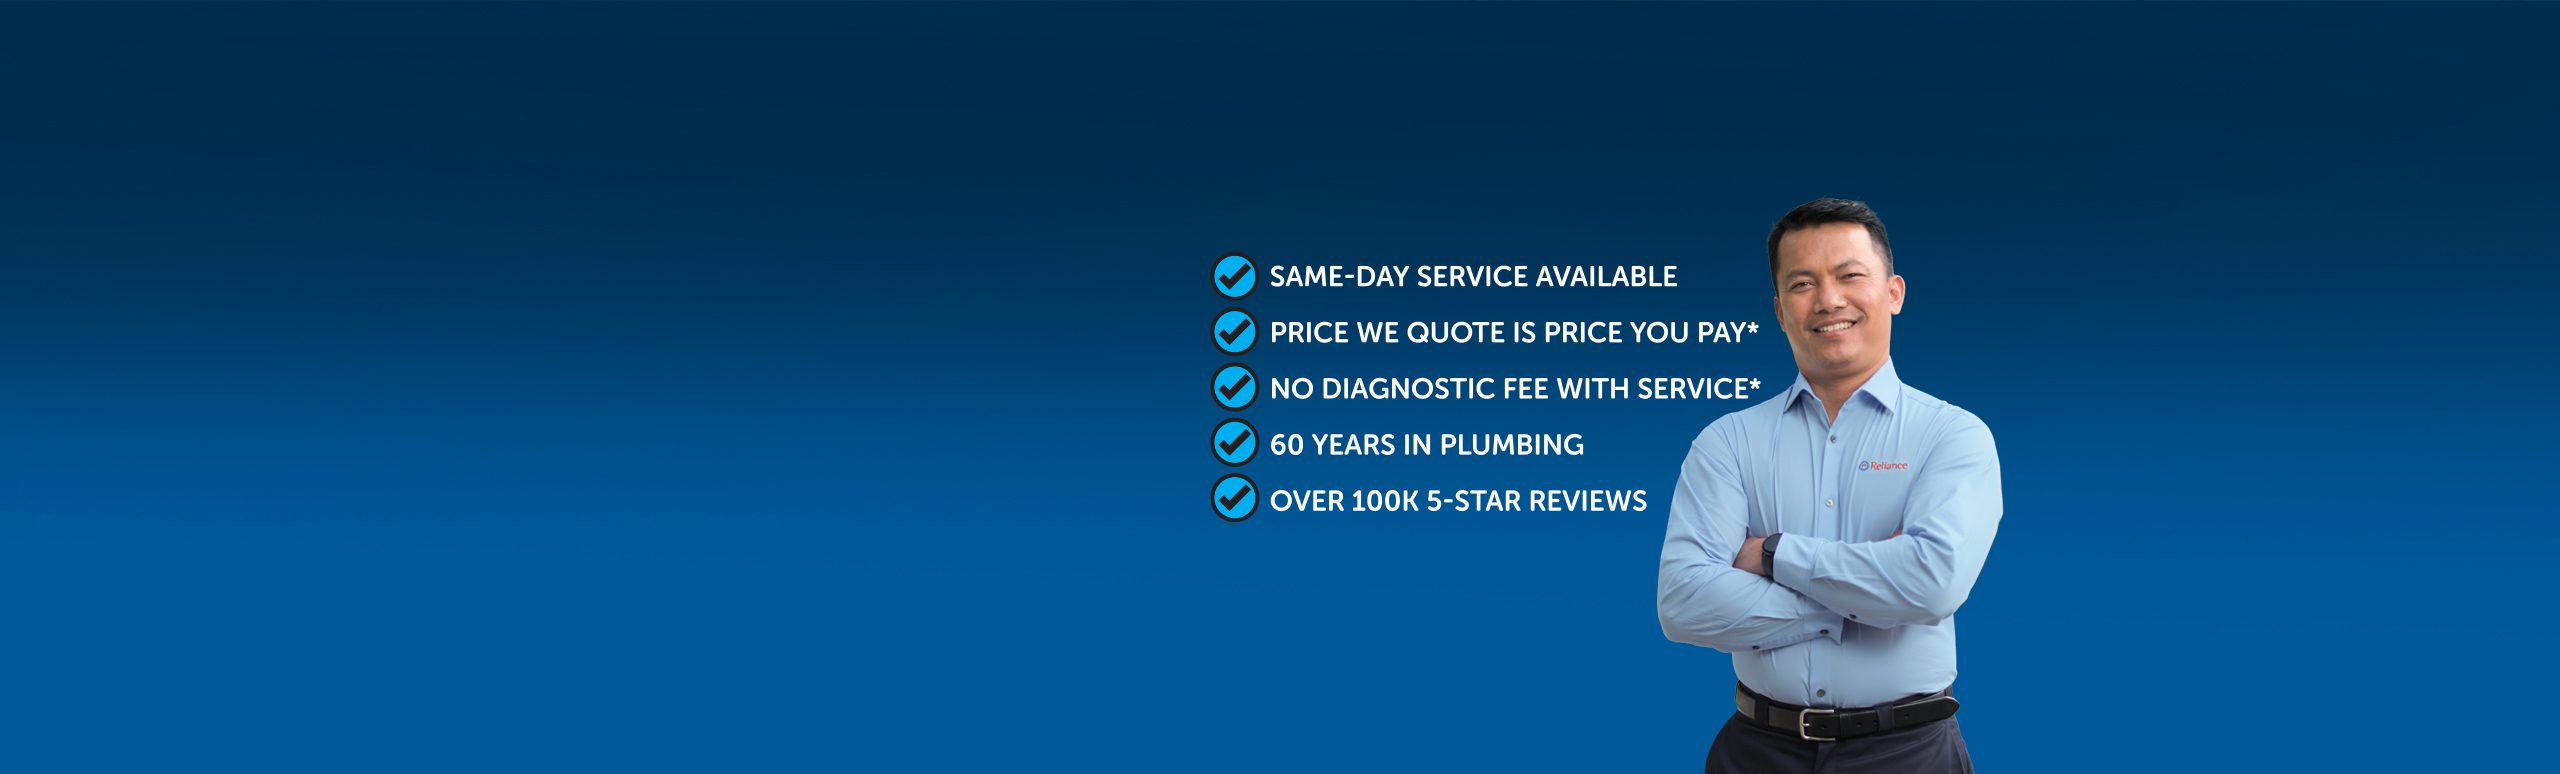 Checklist iteams are: Same-Day Service Available Price We Quote Is Price You Pay* No Diagnostic Fee With Service* 60 Years In Plumbing Over 100k 5-Star Reviews